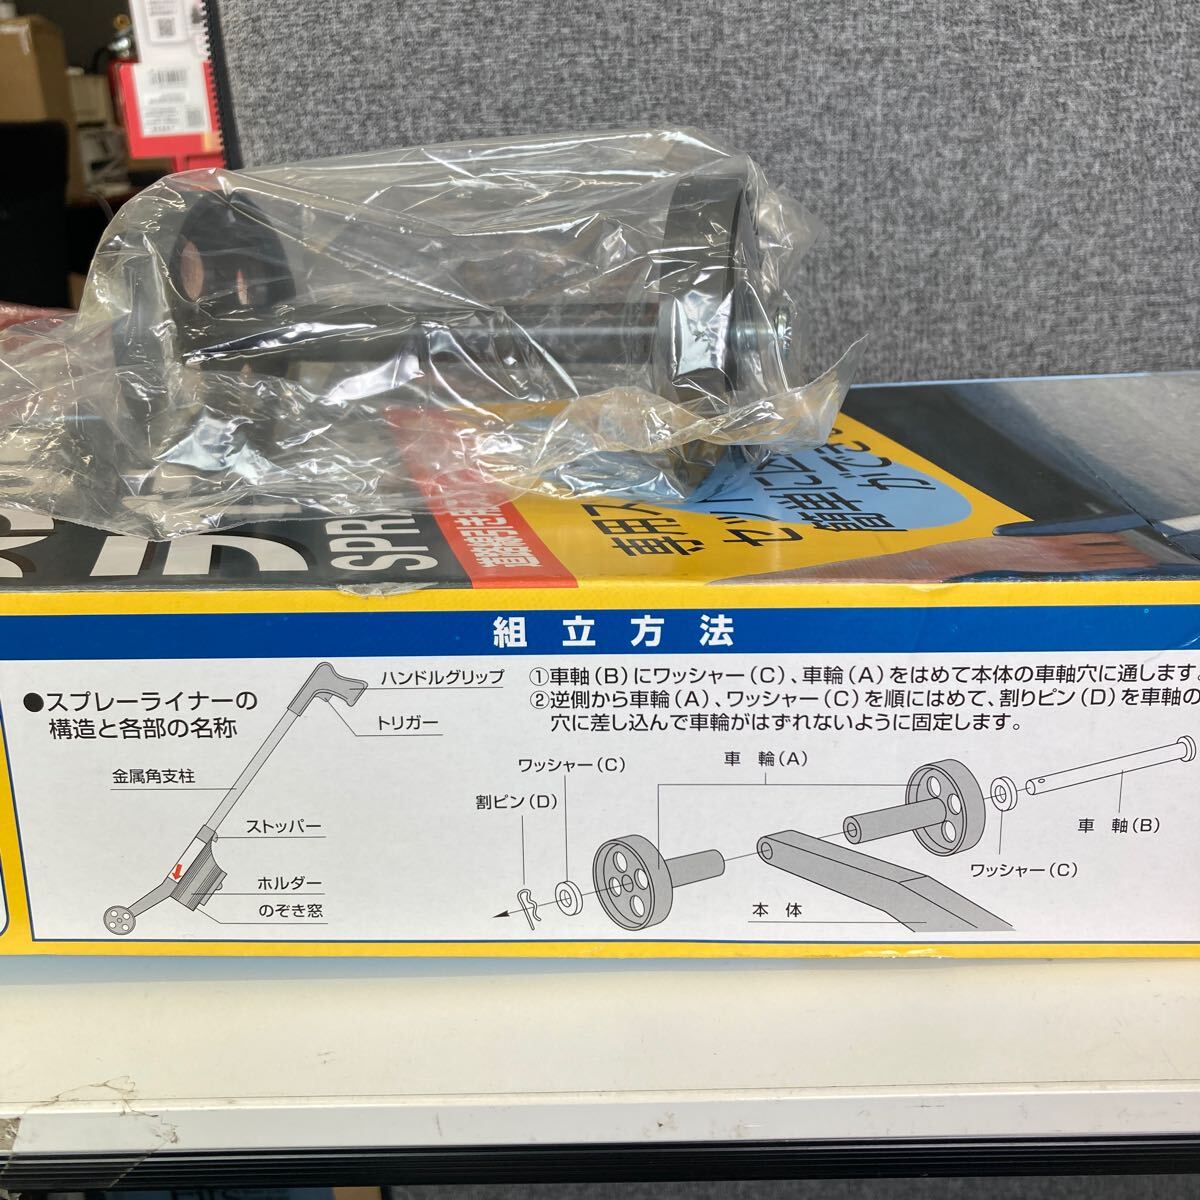 0604c3013 Asahi pen painting apparatus spray liner [ road line discount for spray ] exclusive use apparatus small of the back .... line discount is possible ** including in a package un- possible **